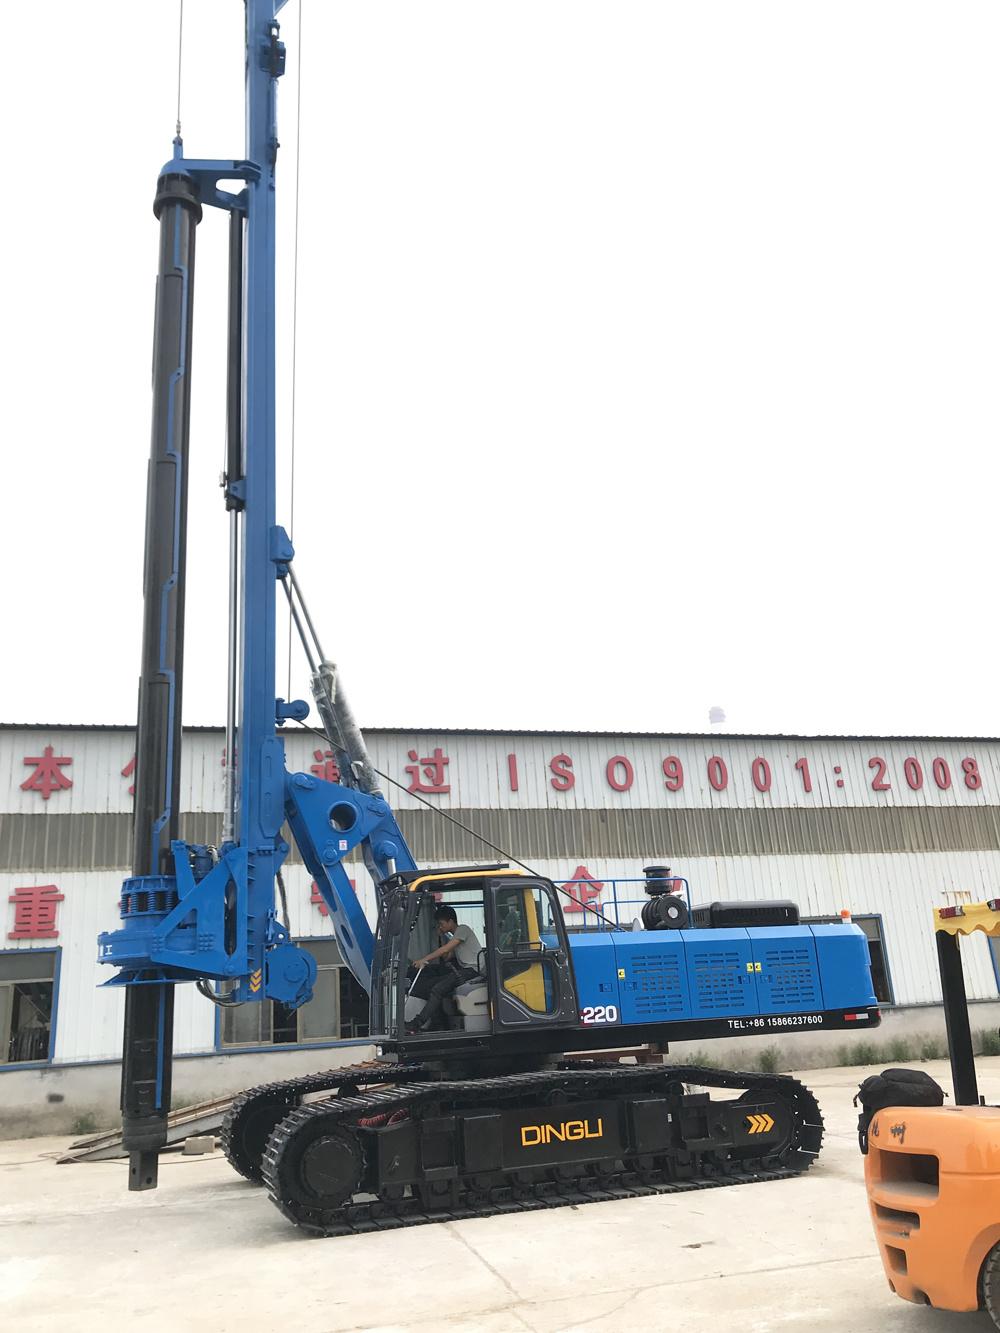 Small Hydraulic Rotary Drilling Machine Dr-220 Used in High-Speed Rail Trestle Piles